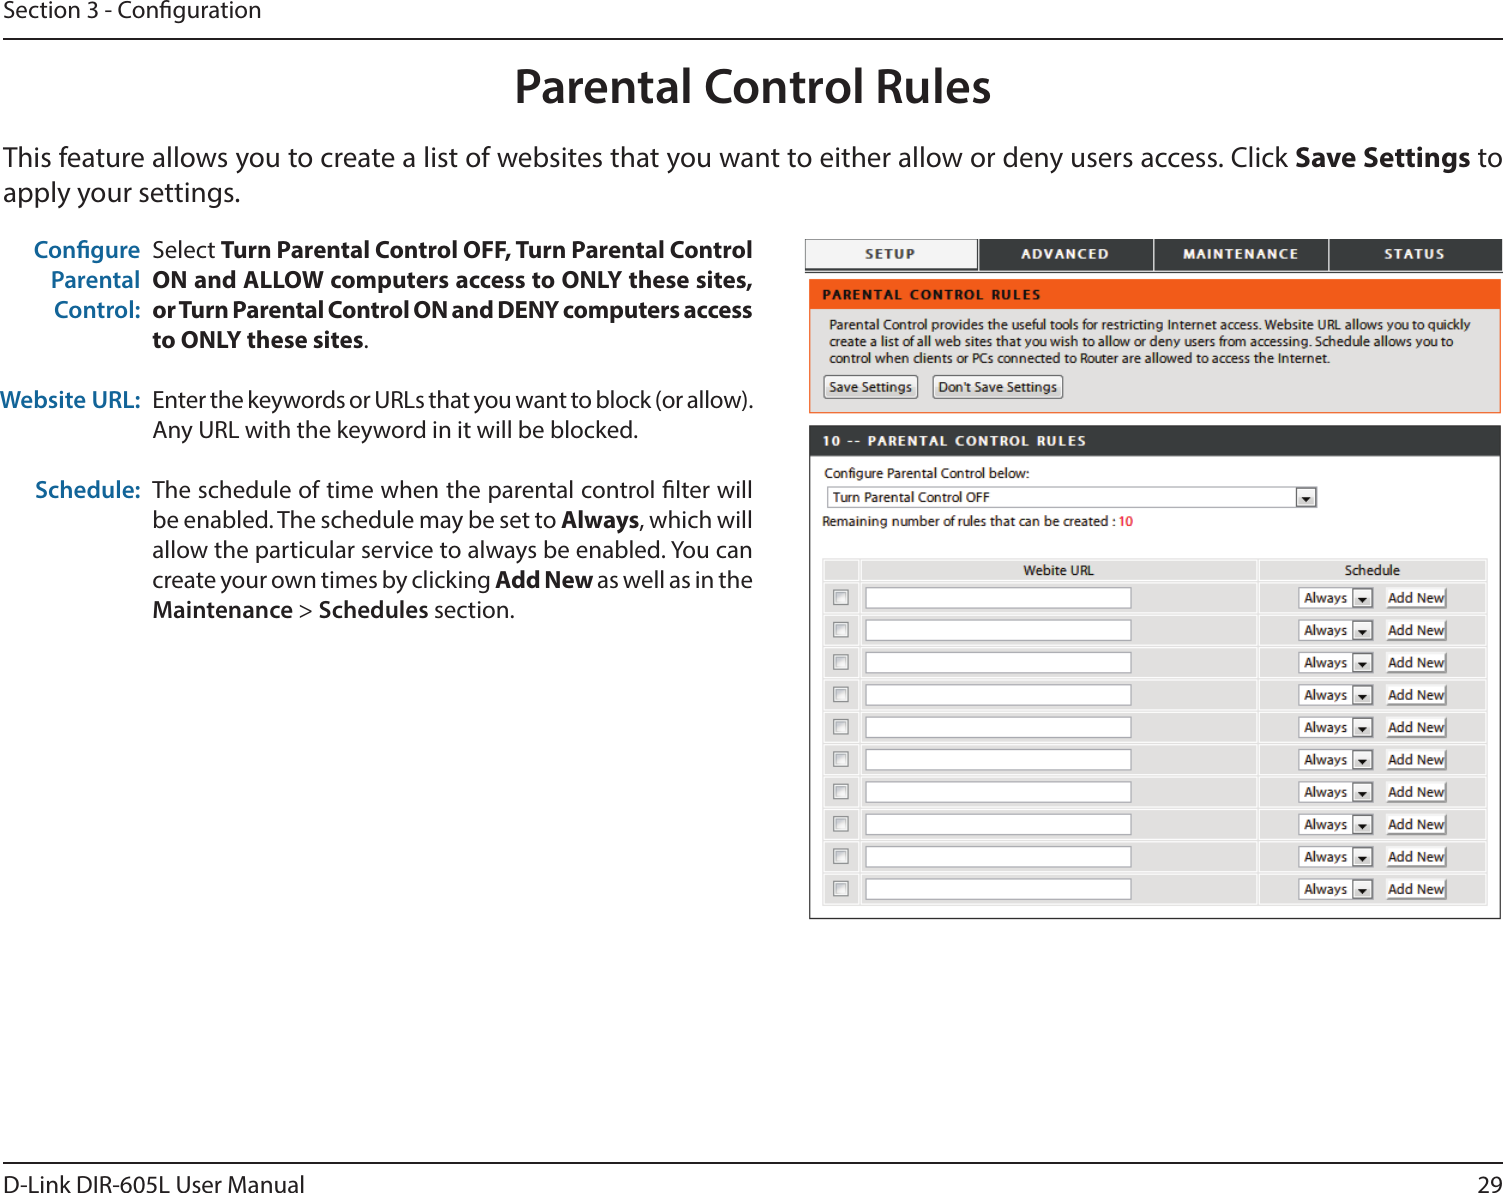 29D-Link DIR-605L User ManualSection 3 - CongurationThis feature allows you to create a list of websites that you want to either allow or deny users access. Click Save Settings to apply your settings.Parental Control RulesSelect Turn Parental Control OFF, Turn Parental Control ON and ALLOW computers access to ONLY these sites, or Turn Parental Control ON and DENY computers access to ONLY these sites.Enter the keywords or URLs that you want to block (or allow). Any URL with the keyword in it will be blocked.The schedule of time when the parental control lter will be enabled. The schedule may be set to Always, which will allow the particular service to always be enabled. You can create your own times by clicking Add New as well as in the Maintenance &gt; Schedules section.Congure Parental Control:Website URL:Schedule: